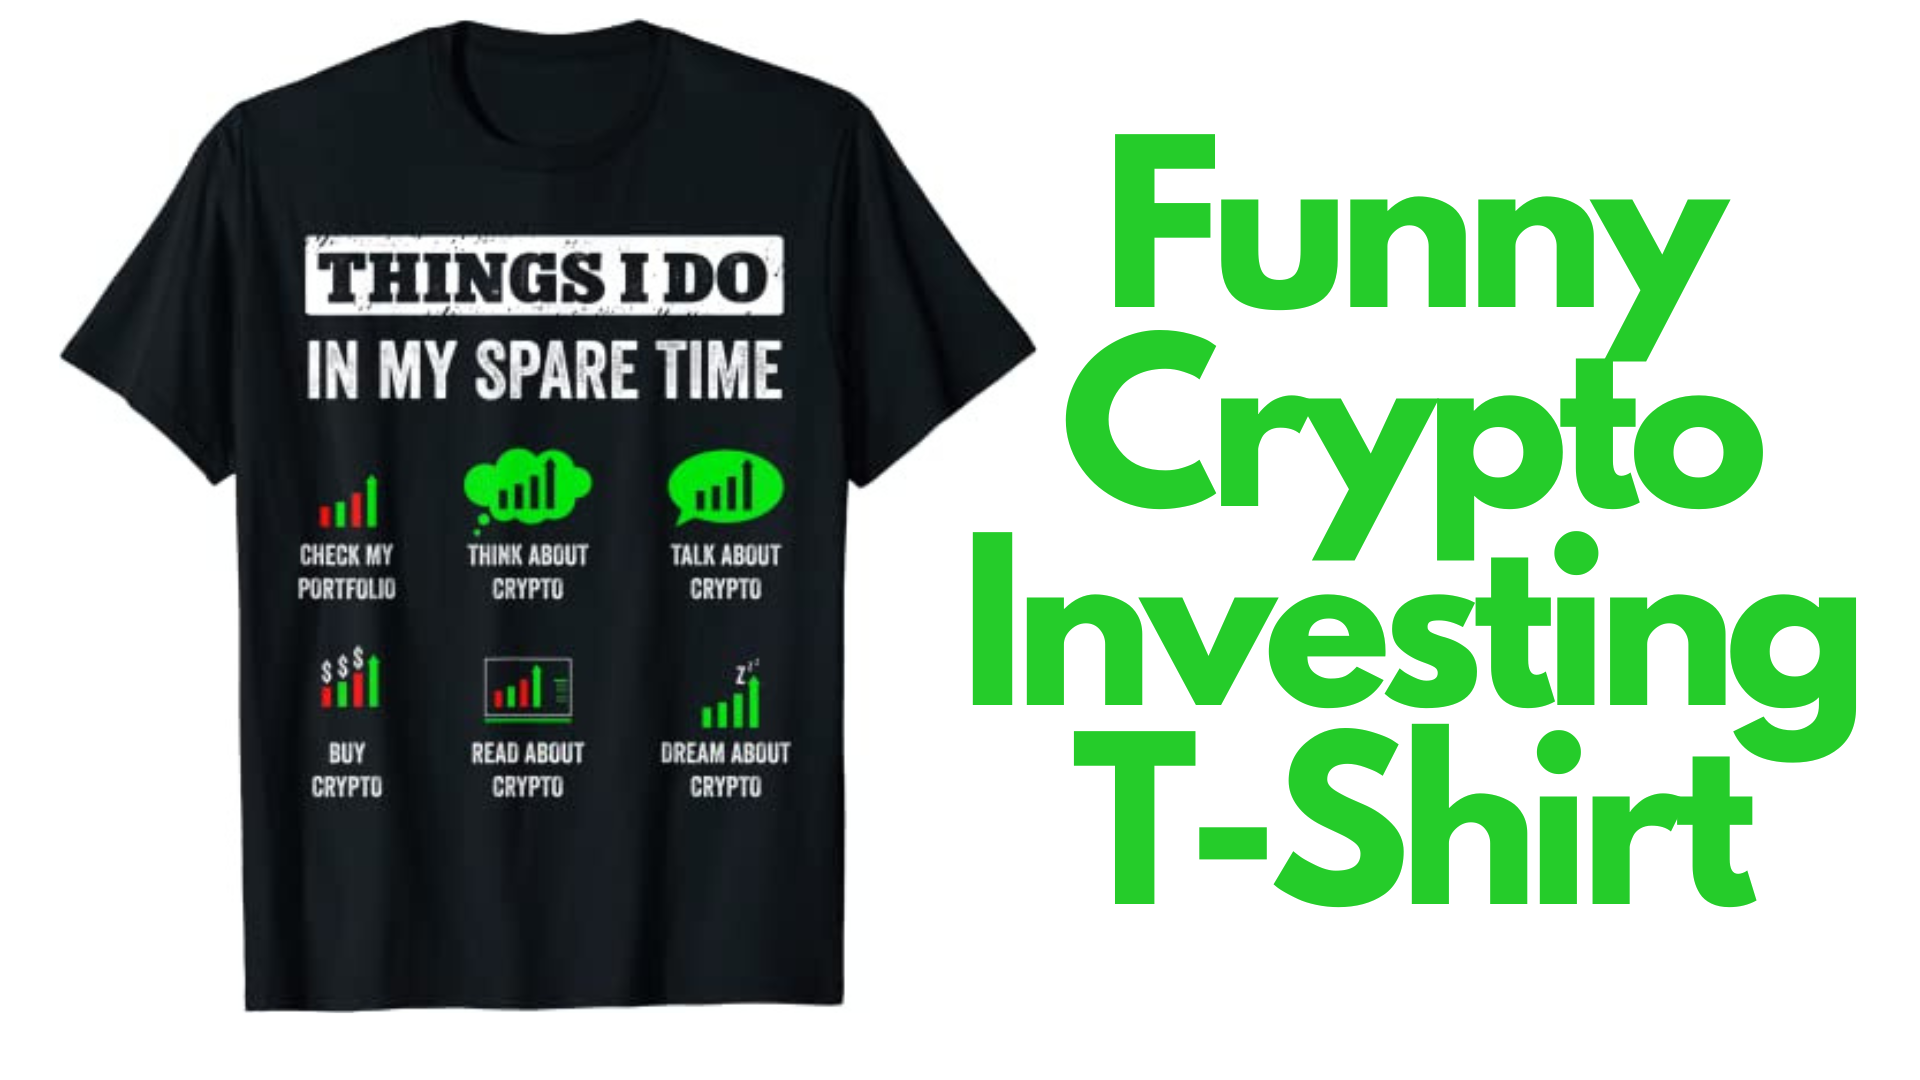 A black shirt with Funny Crypto design on it